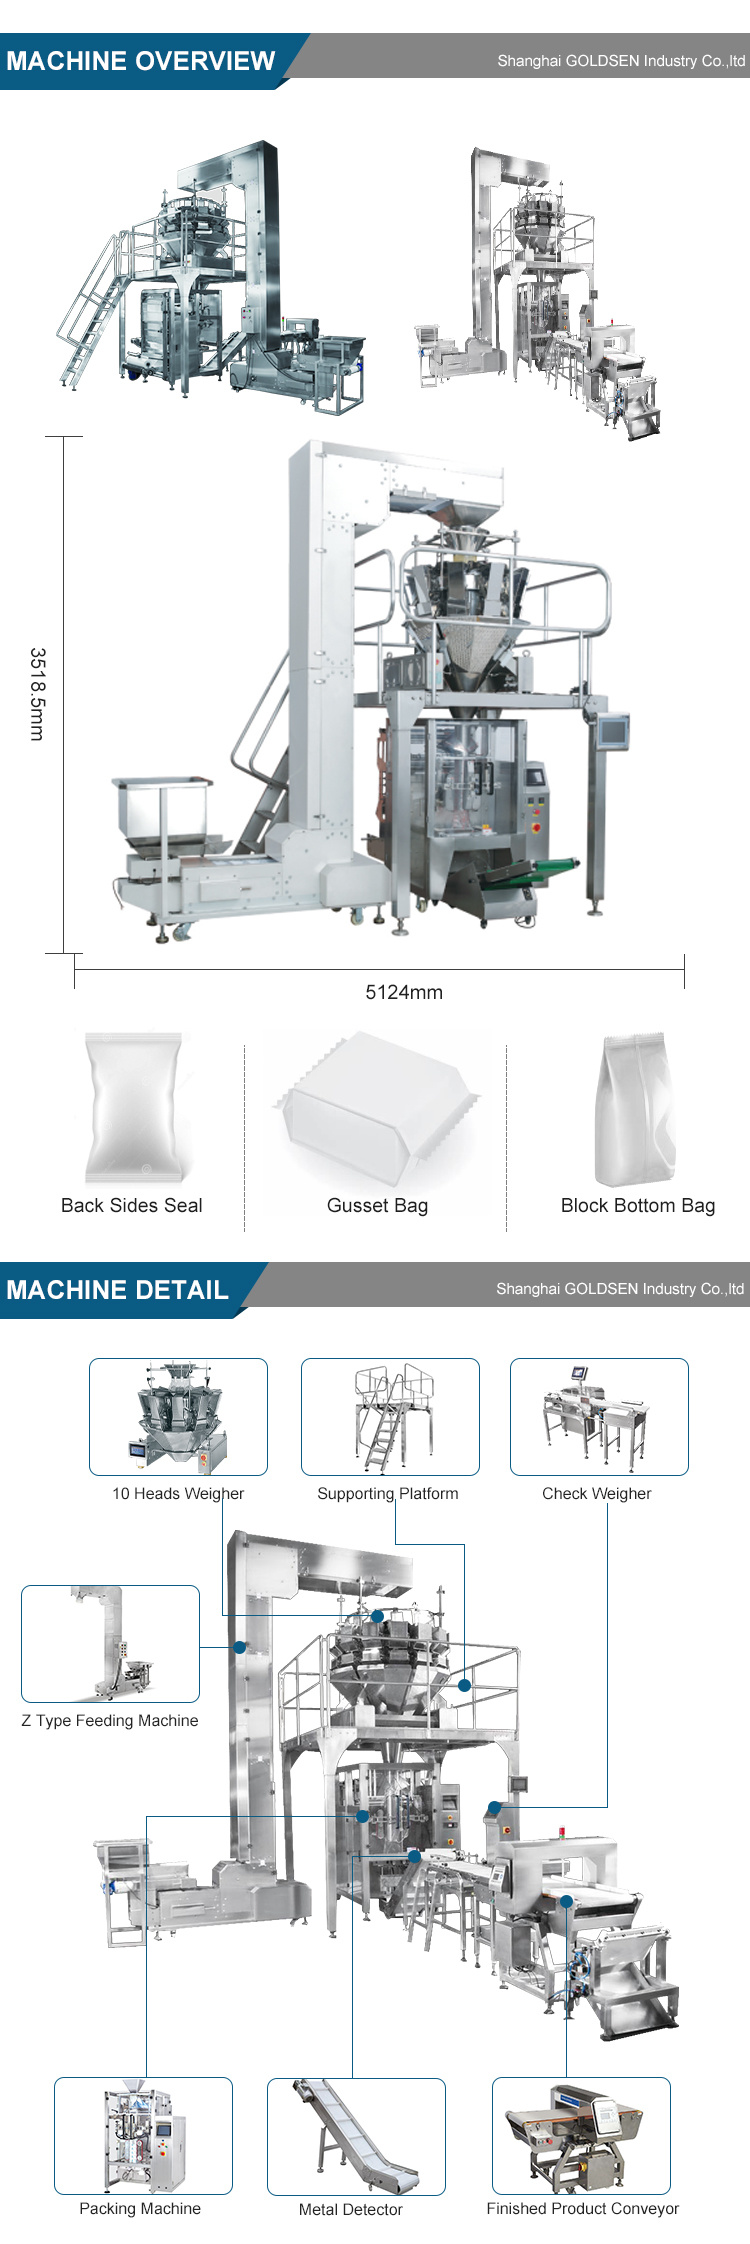 China Supplier Automatic Weighing Packing Machine Vertical Packing Machine 10 Heads Weigher